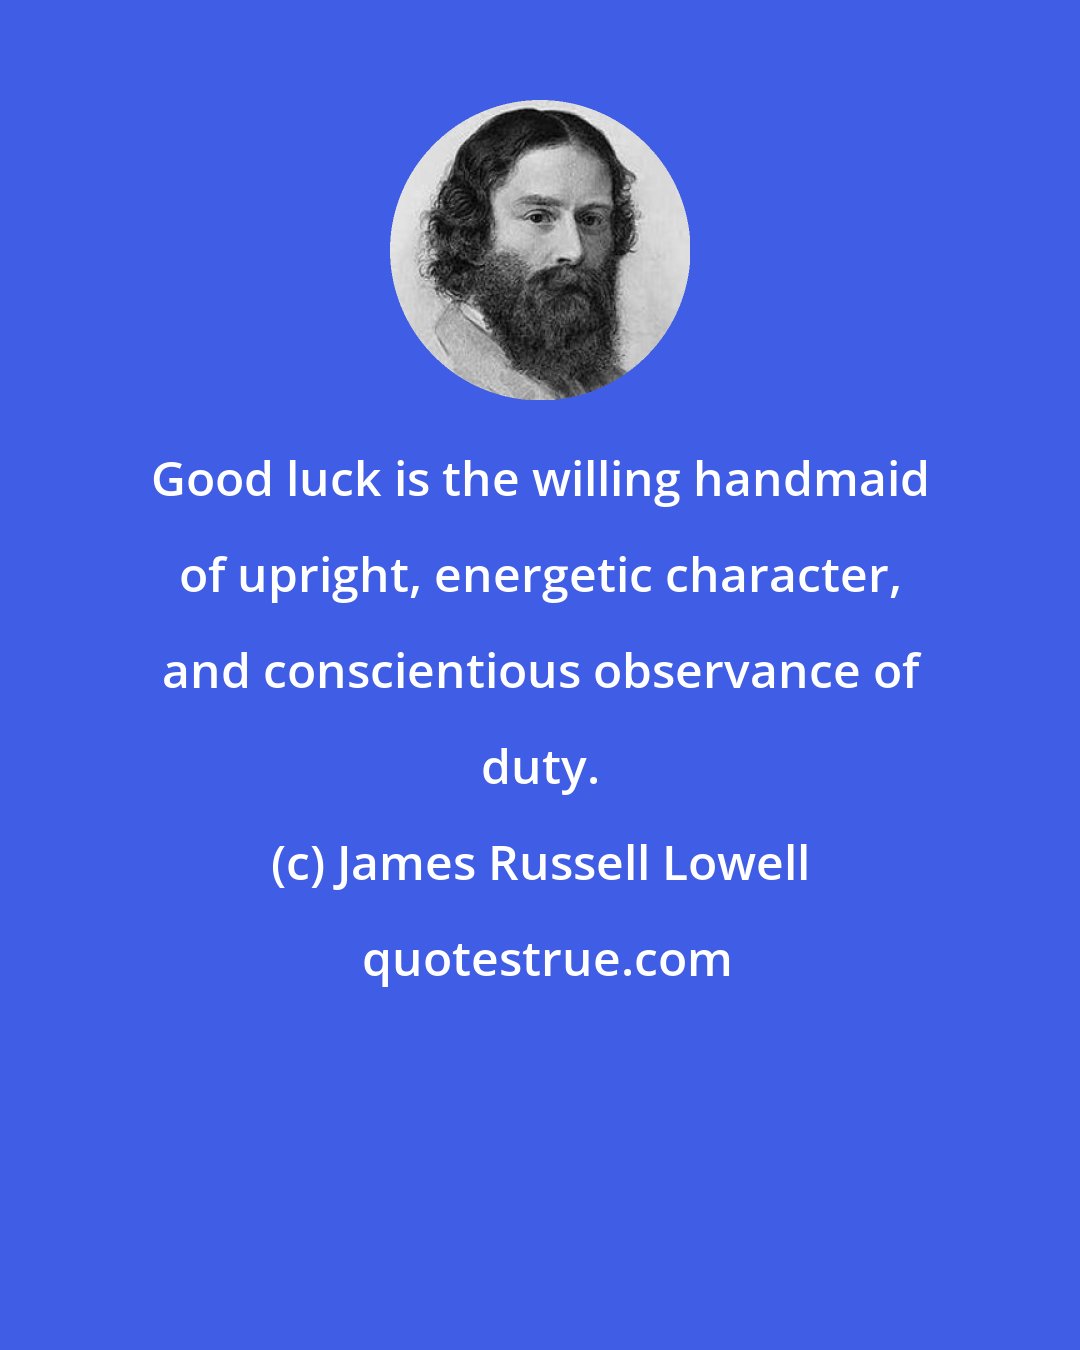 James Russell Lowell: Good luck is the willing handmaid of upright, energetic character, and conscientious observance of duty.